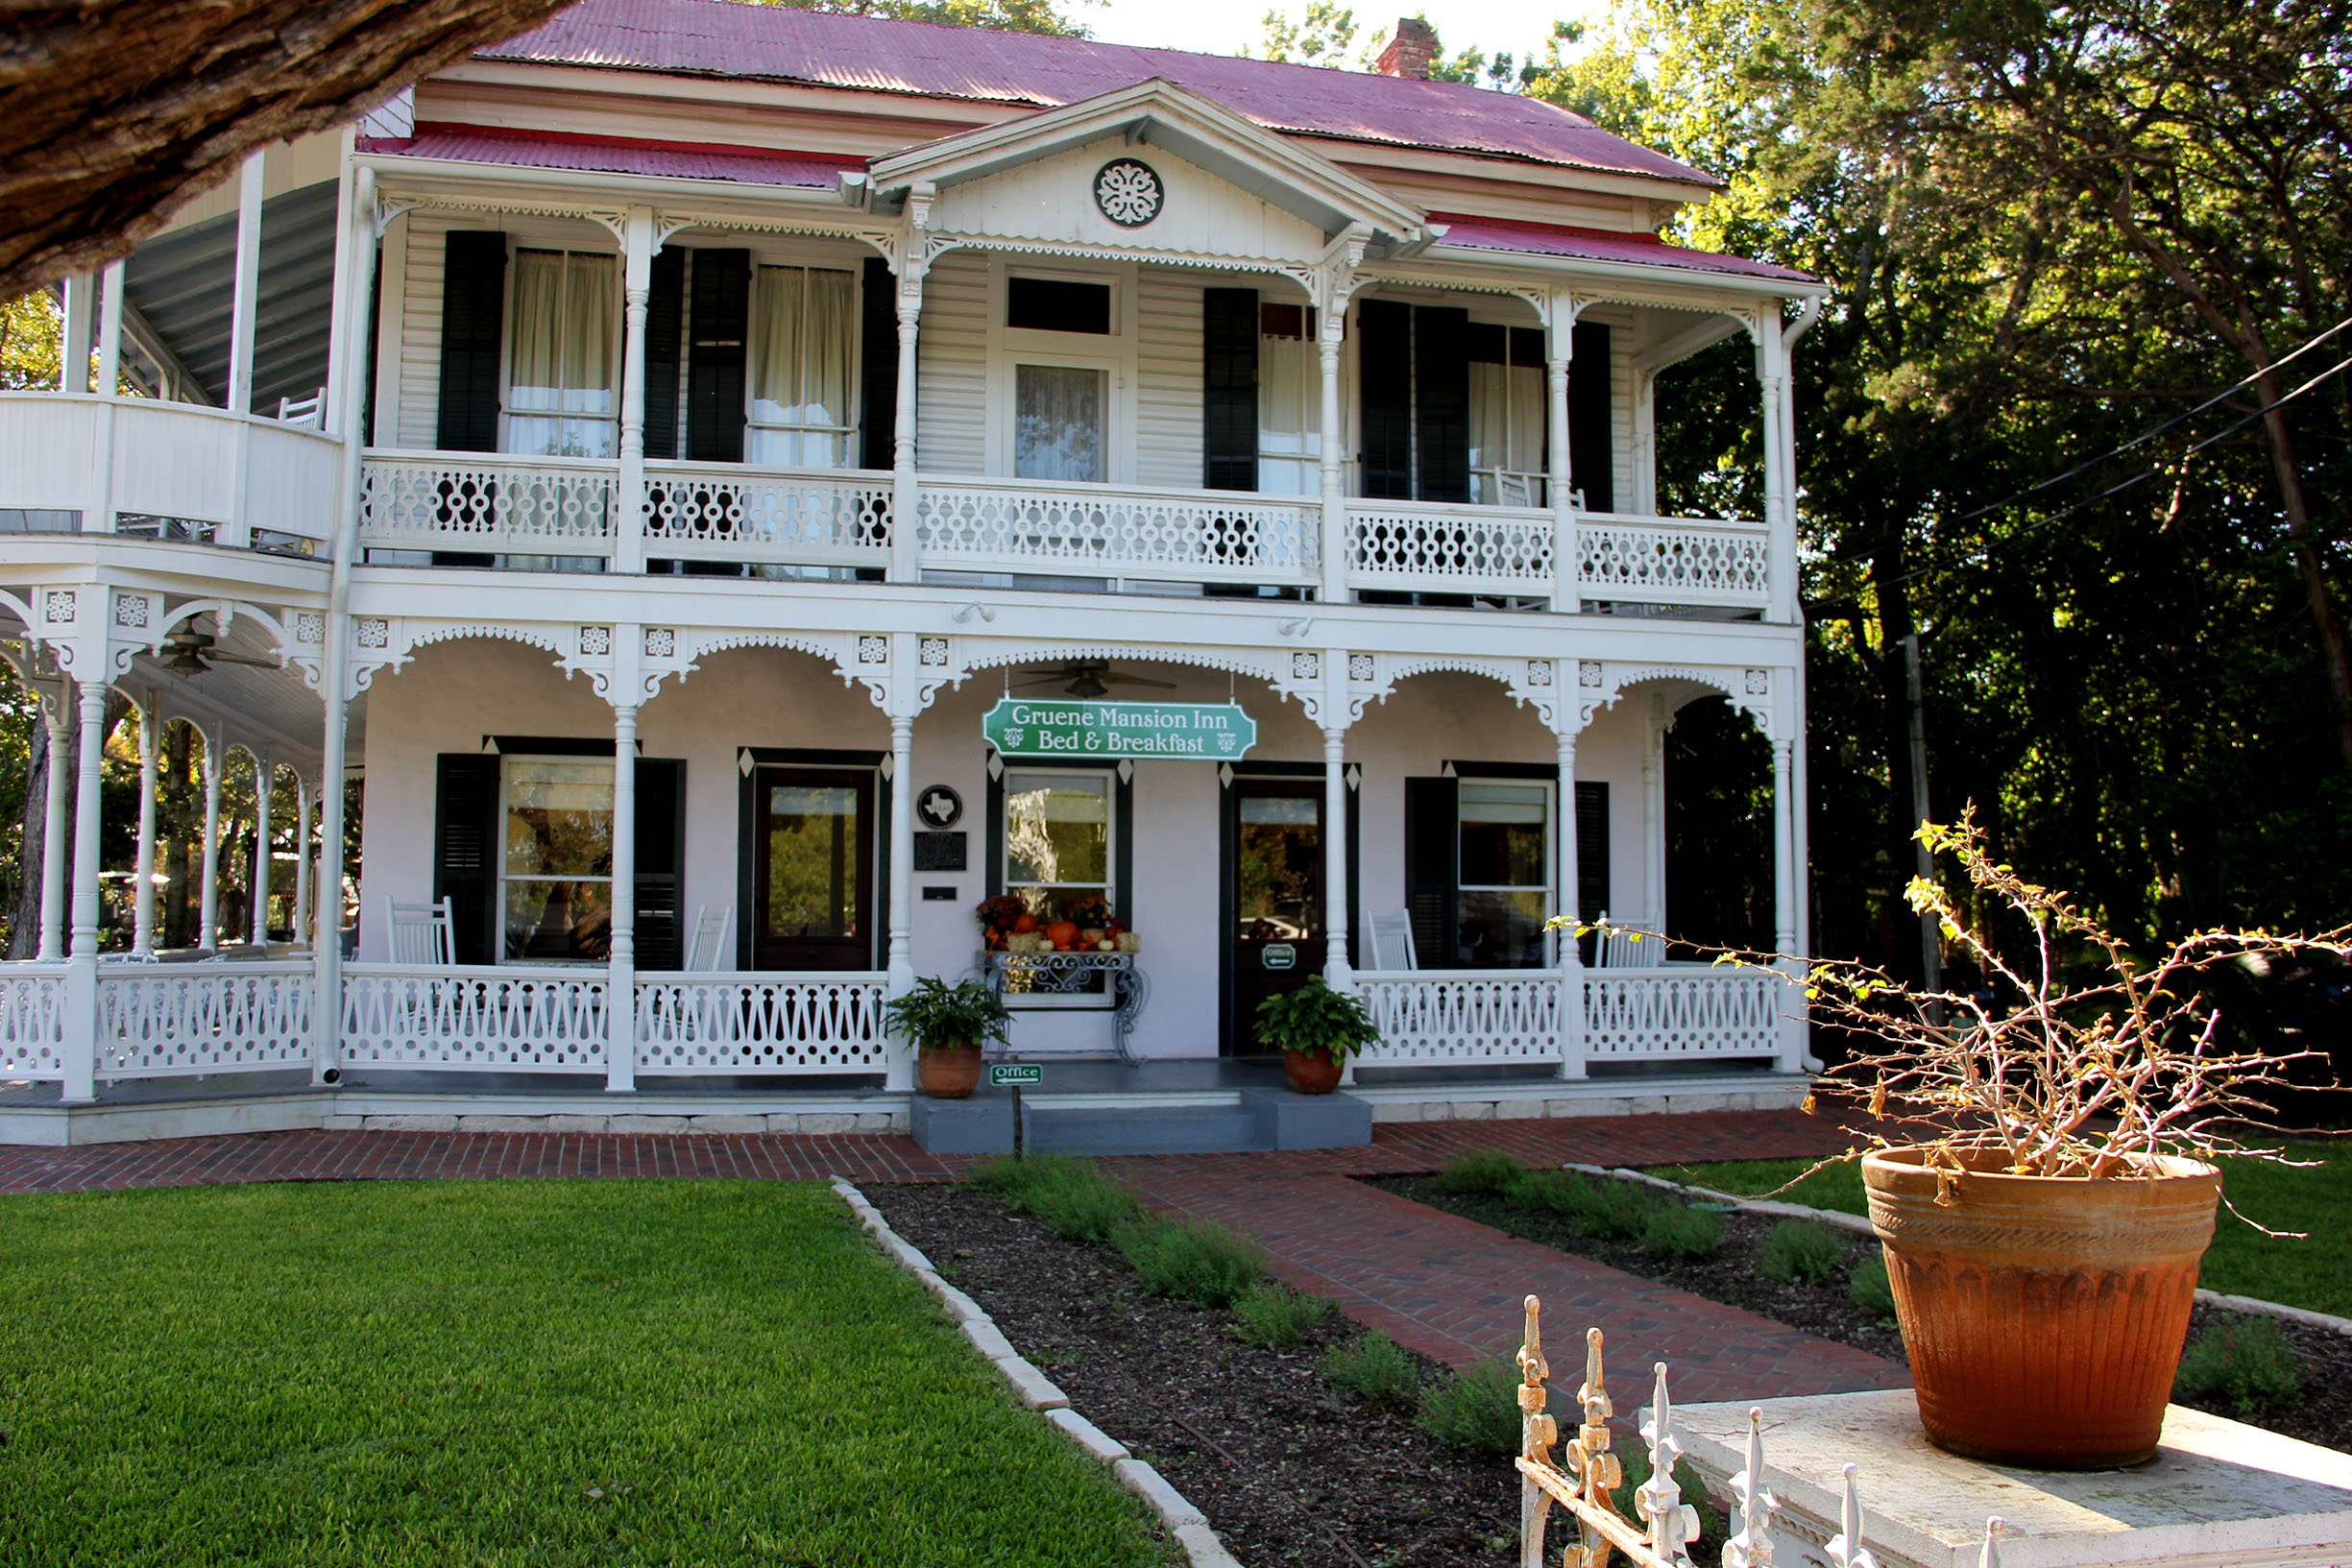 PHOTO: Across the street from the festival and around other historical building sits the Gruene Mansion Inn Bed and Breakfast. Photo by The Signal Online Editor Alyssa Shotwell.